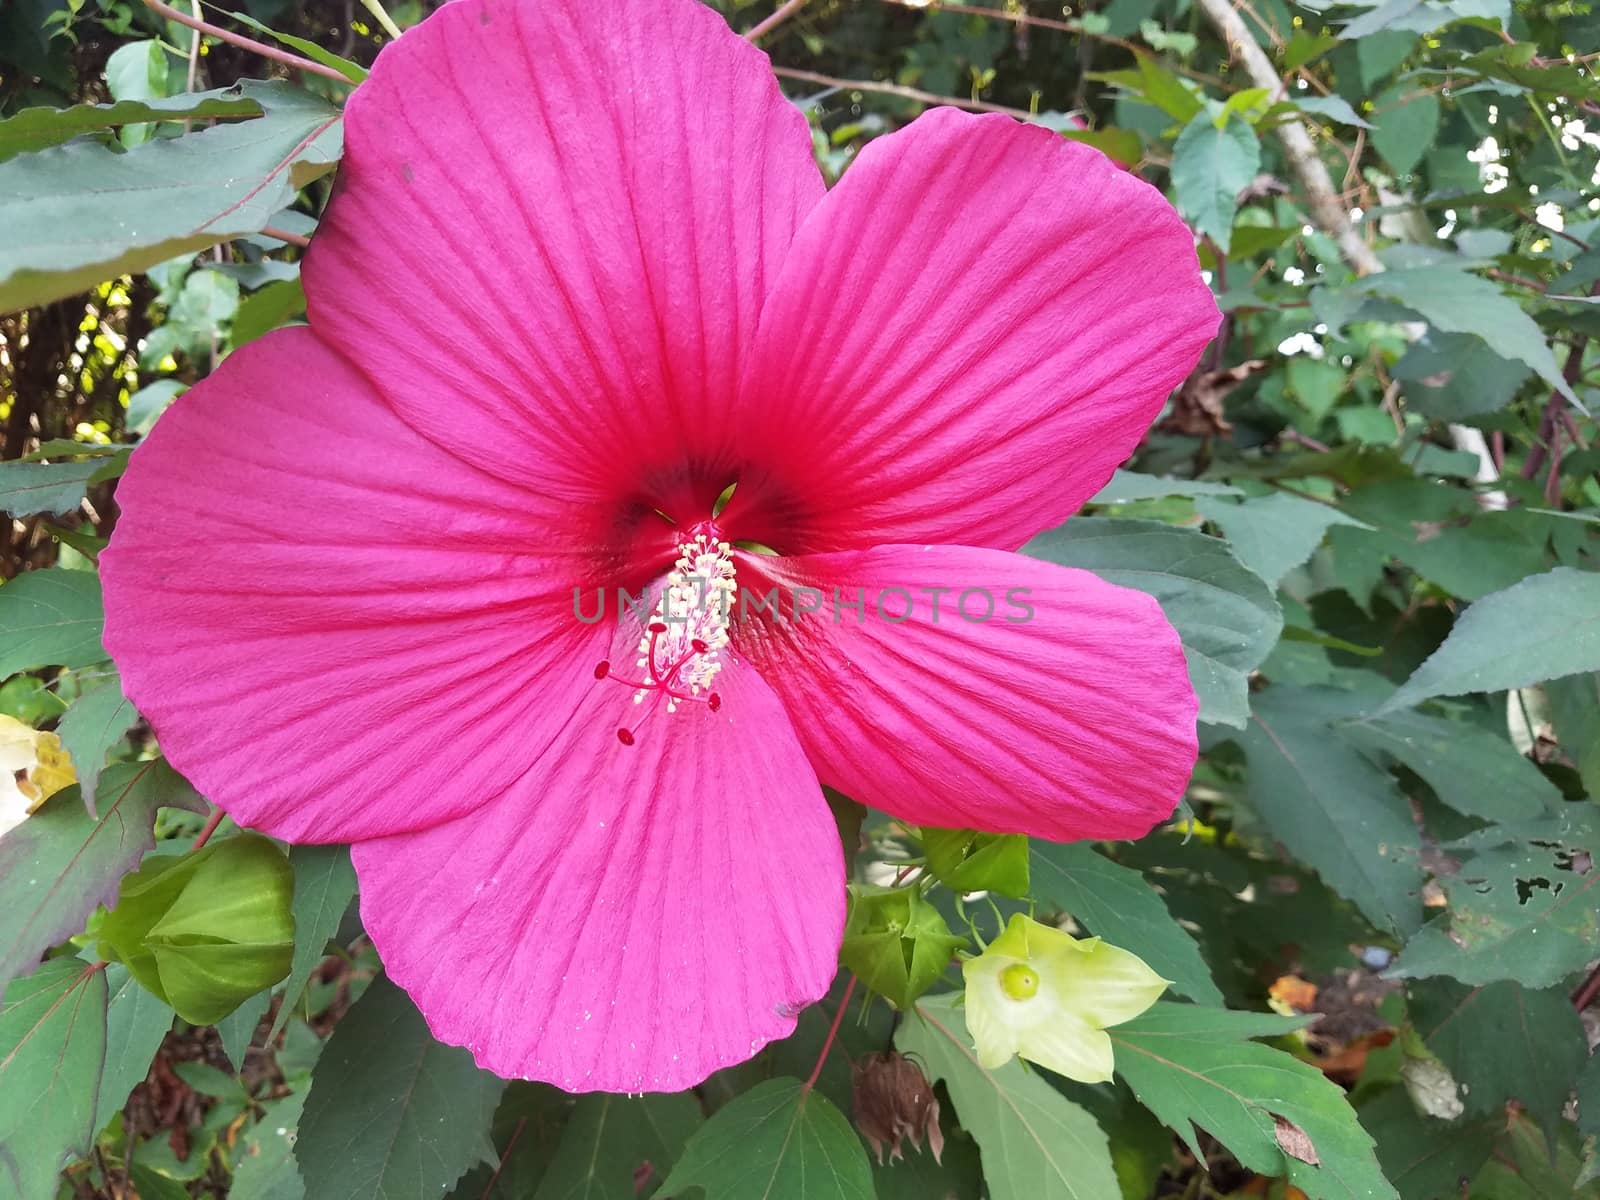 plant with green leaves and large pink flower by stockphotofan1